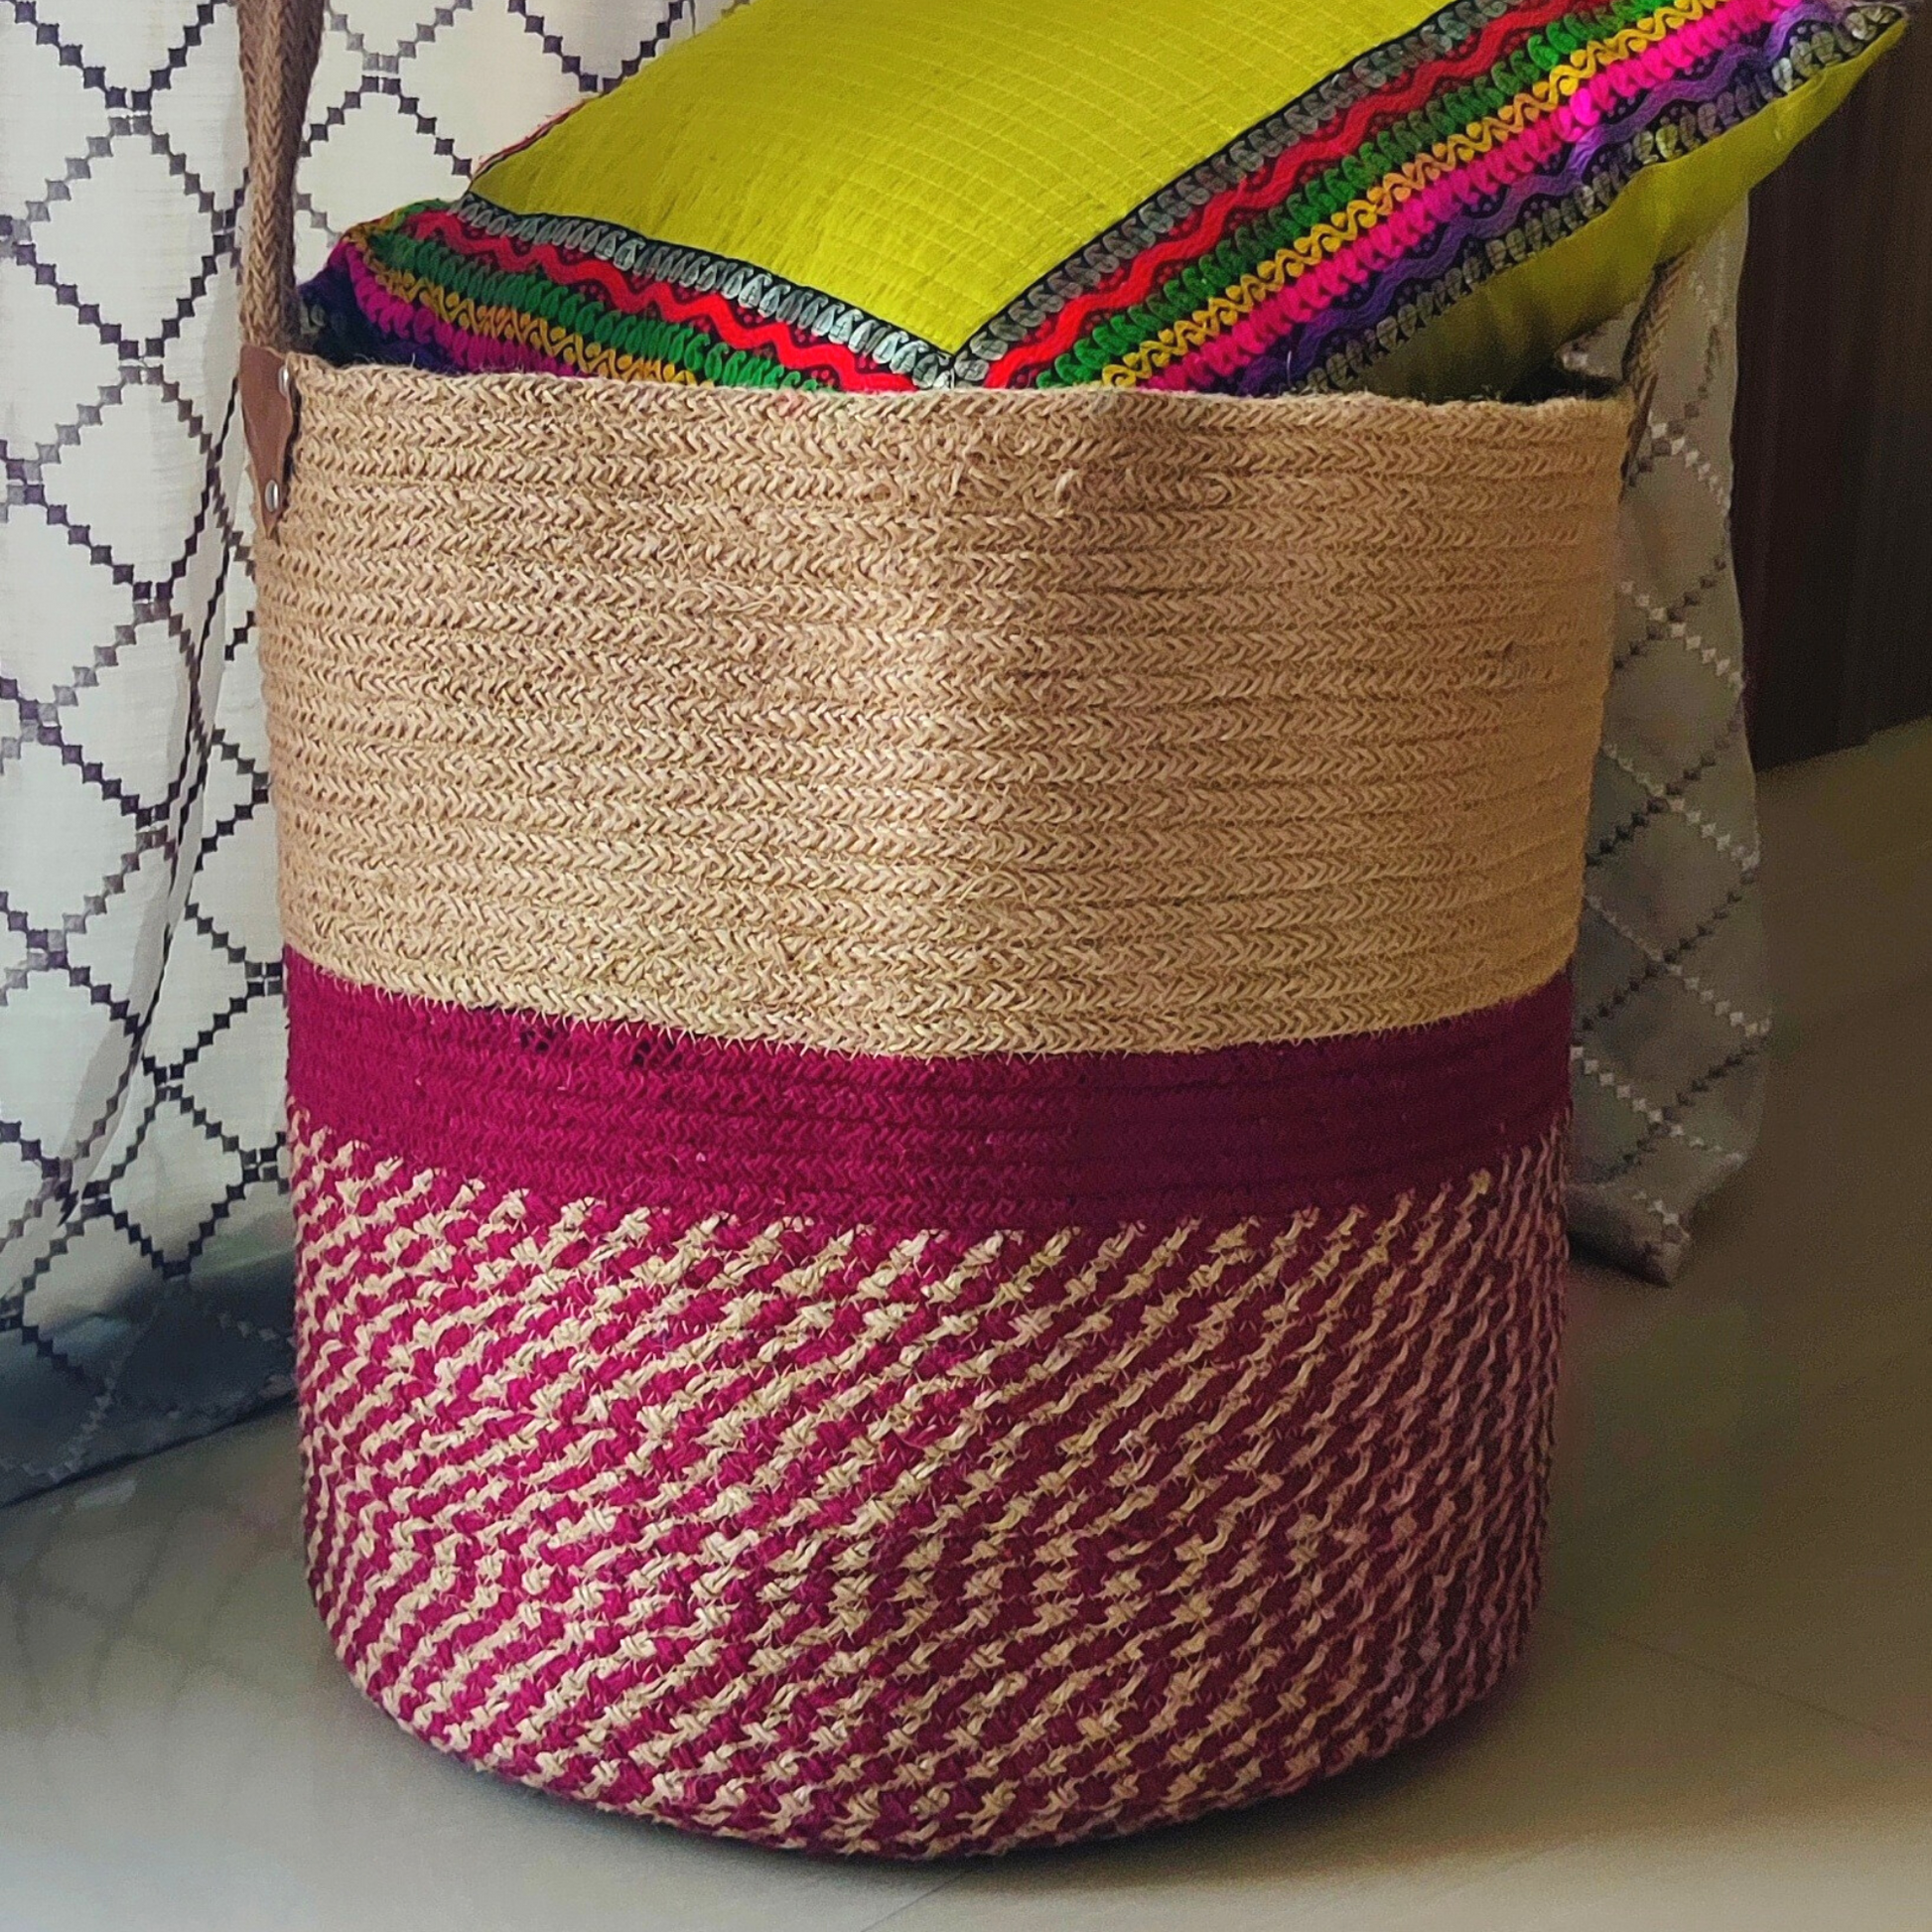 Spacious Jute Laundry Basket - 16 Inches | Maroon - jasmeyhomes